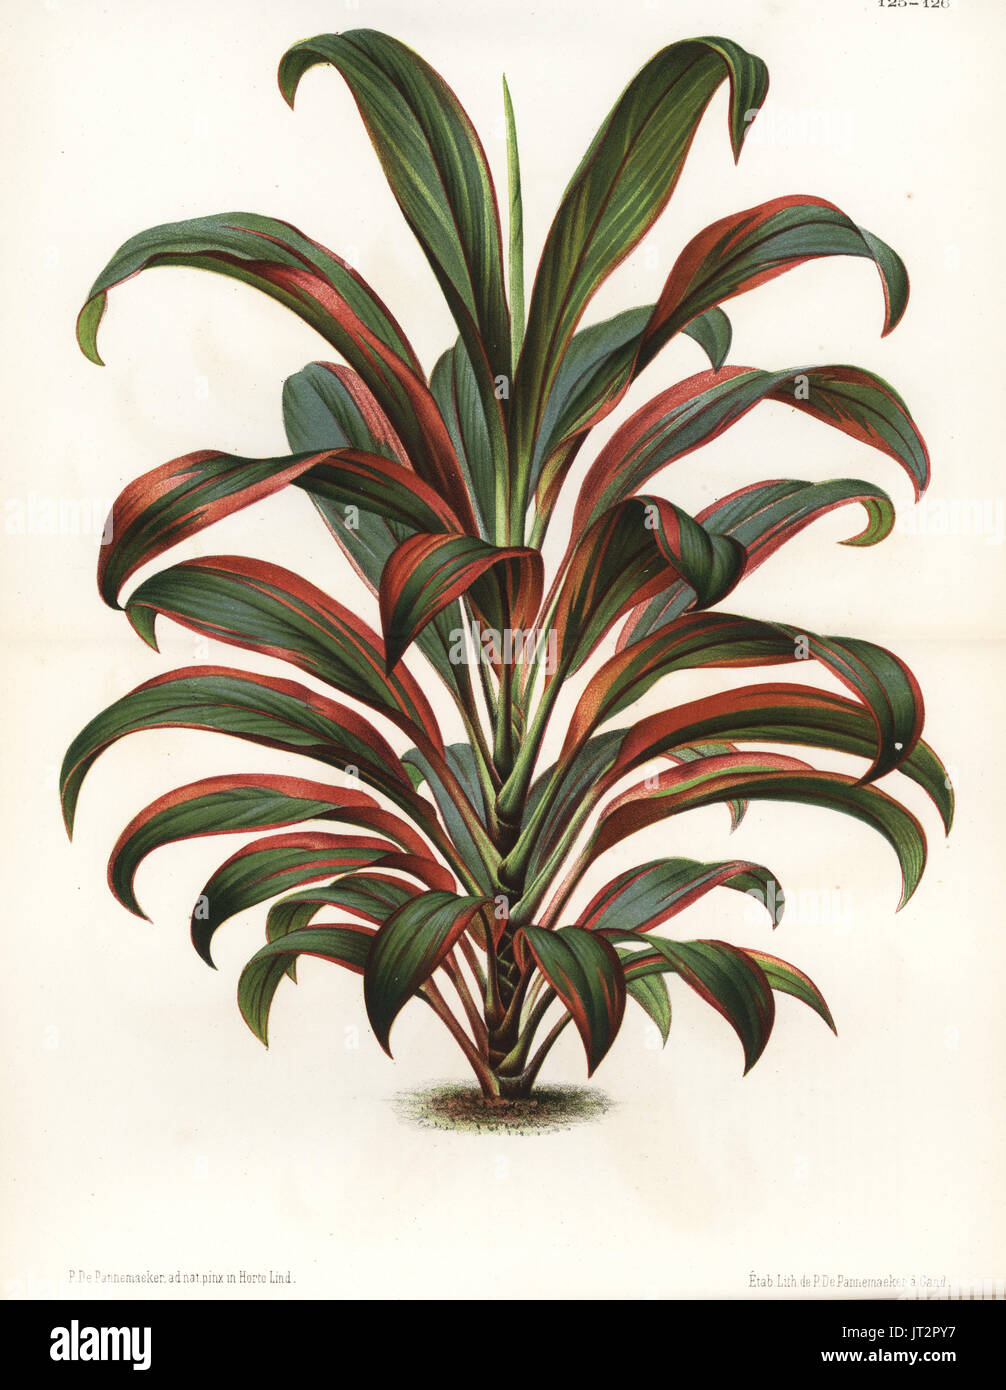 Cabbage palm, Cordyline fruticosa (Dracaena gloriosa). Drawn and chromolithographed by P. de Pannemaeker from Jean Linden's l'Illustration Horticole, Brussels, 1873. Stock Photo